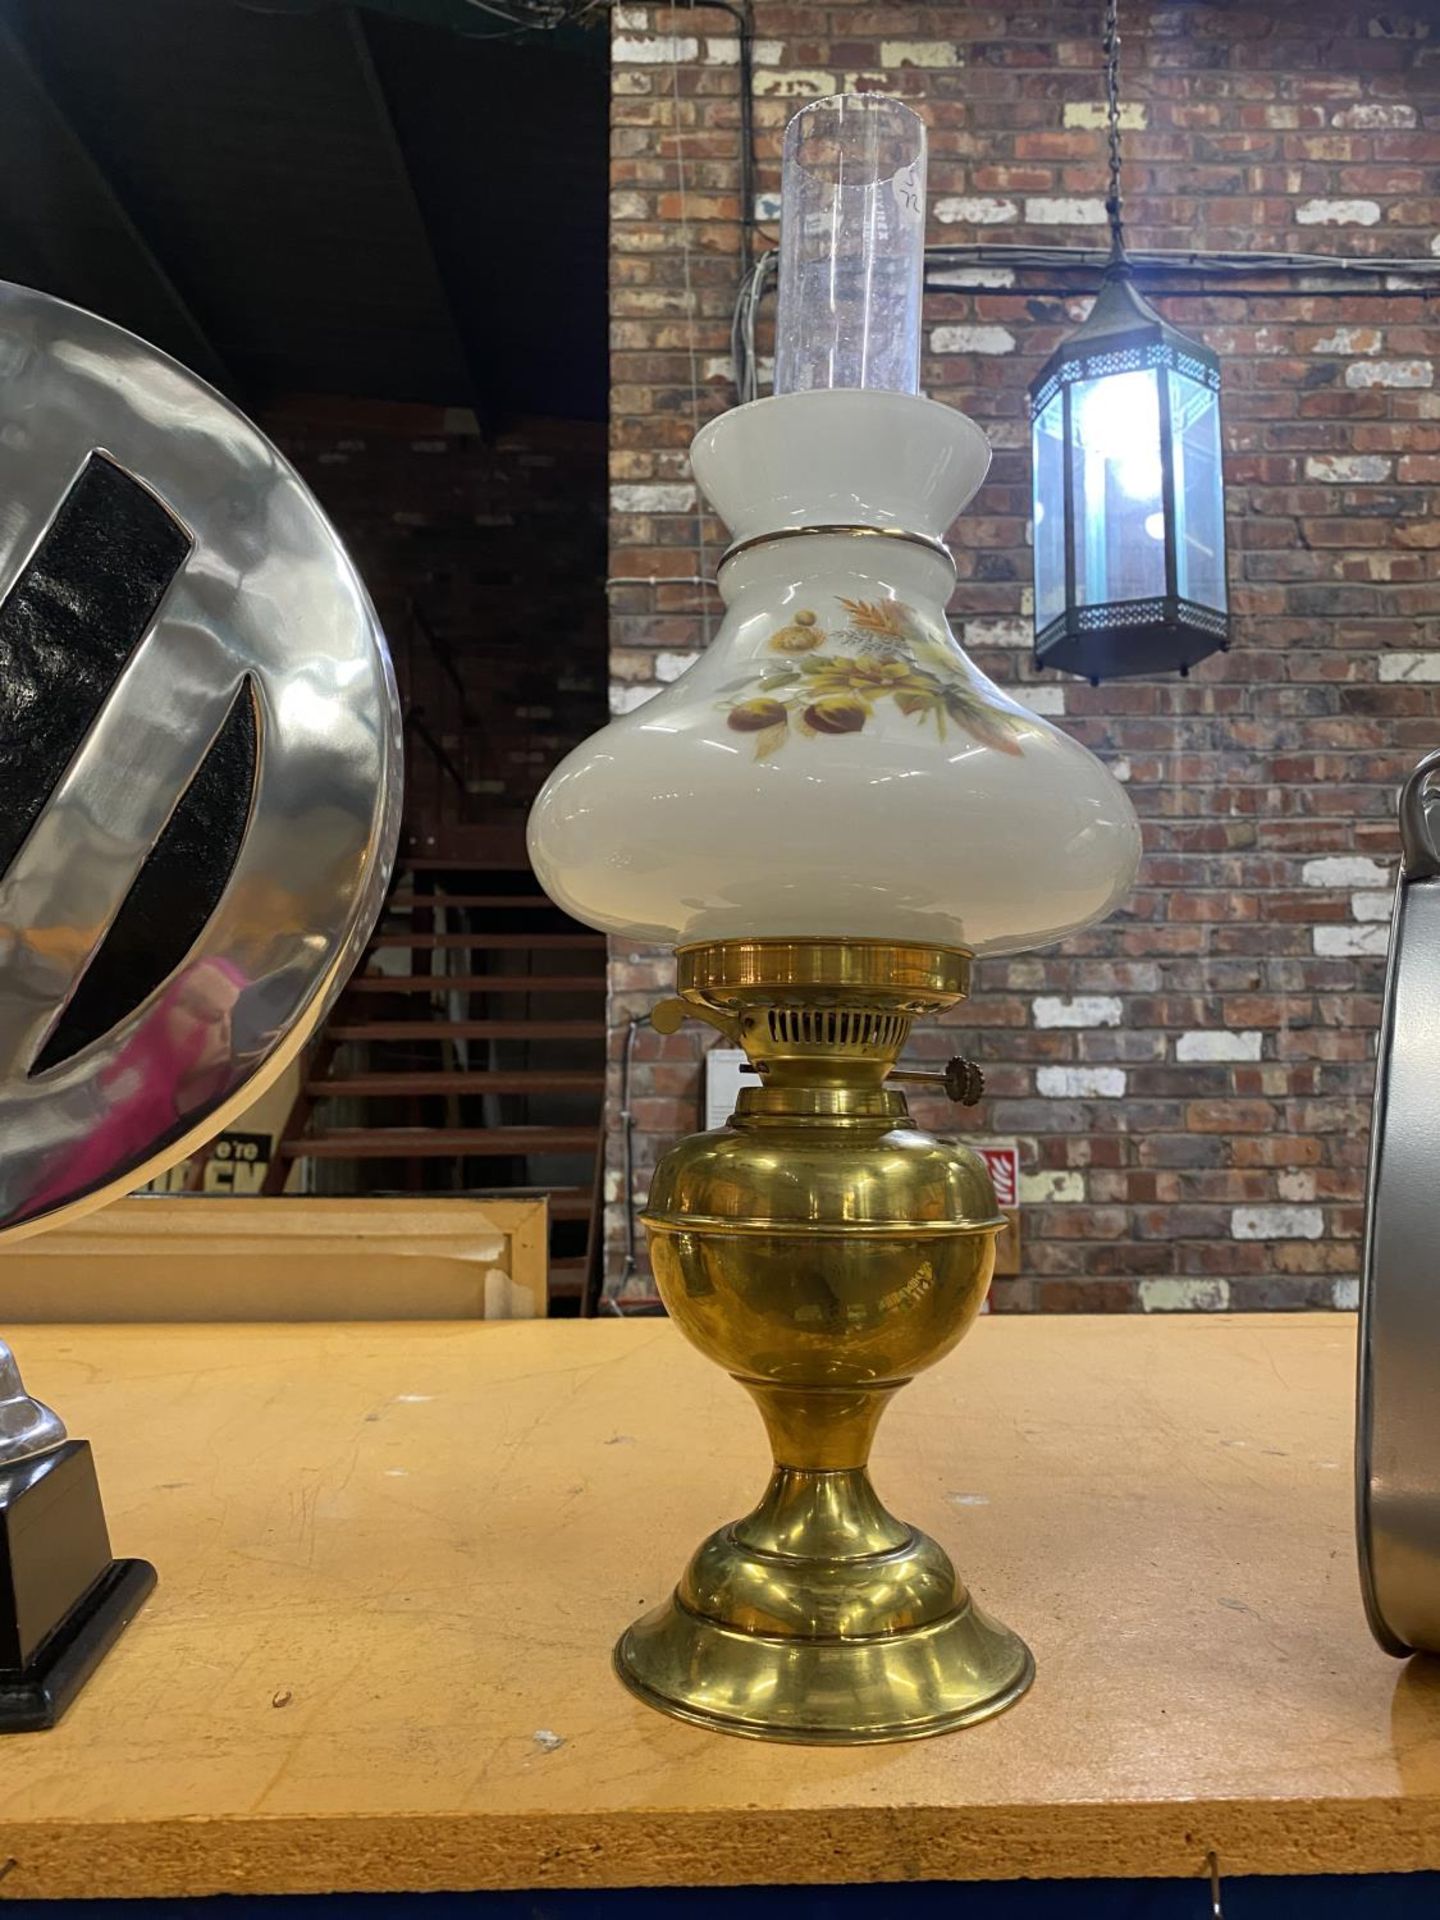 A BRASS BASED OIL LAMP WITH A CLEAR GLASS CHIMNEY AND A FLORAL GLASS SHADE - Image 6 of 8